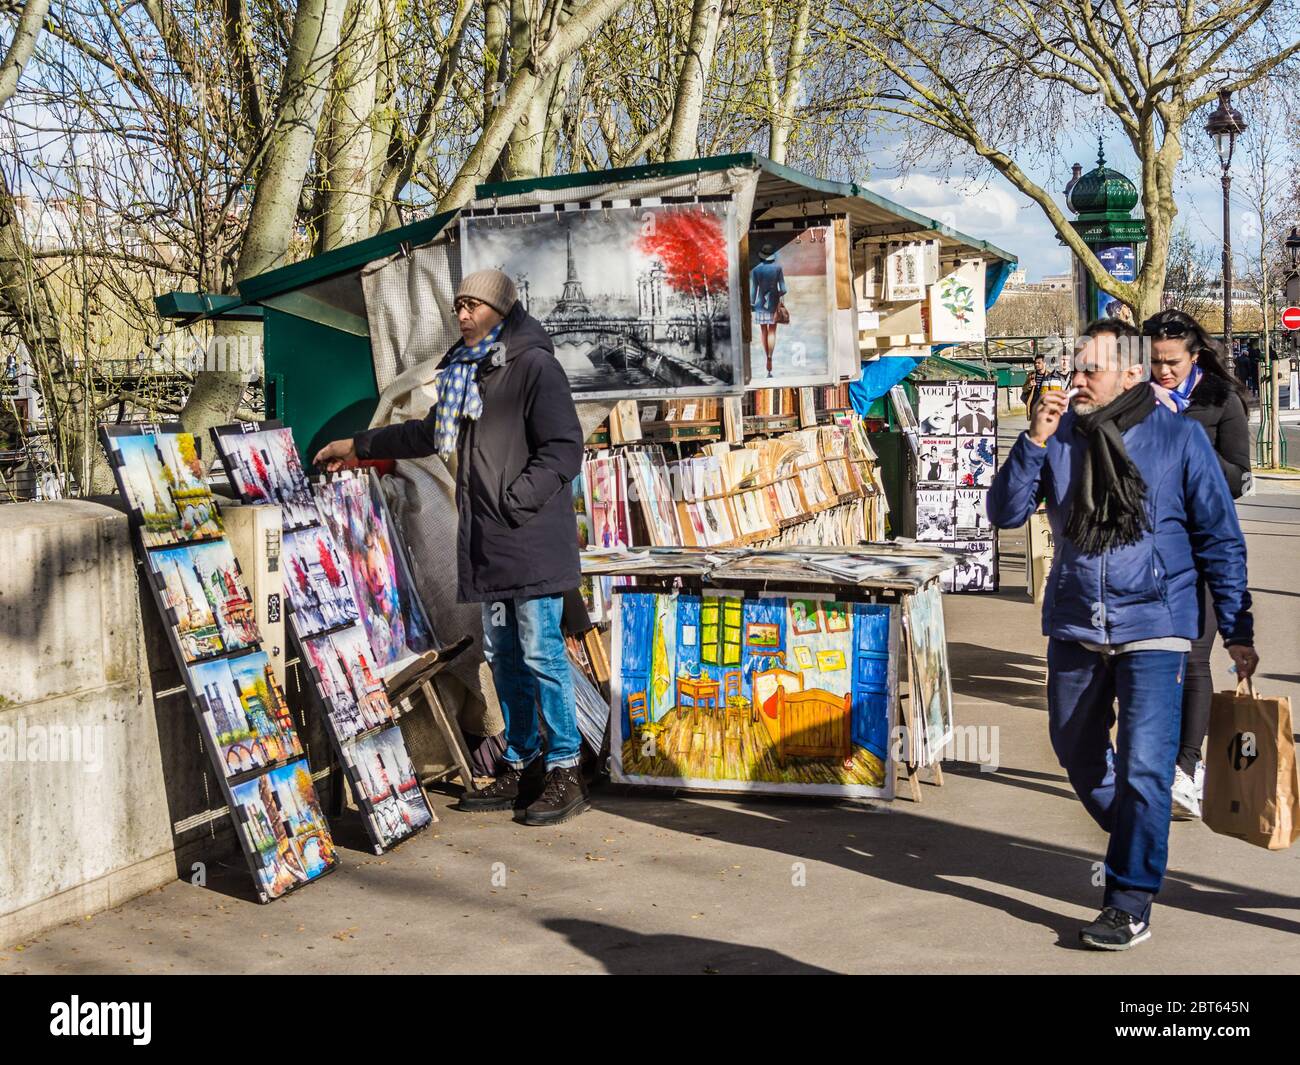 Outdoor bookseller 'bouquiniste' on banks of river Seine, Paris, France. Stock Photo